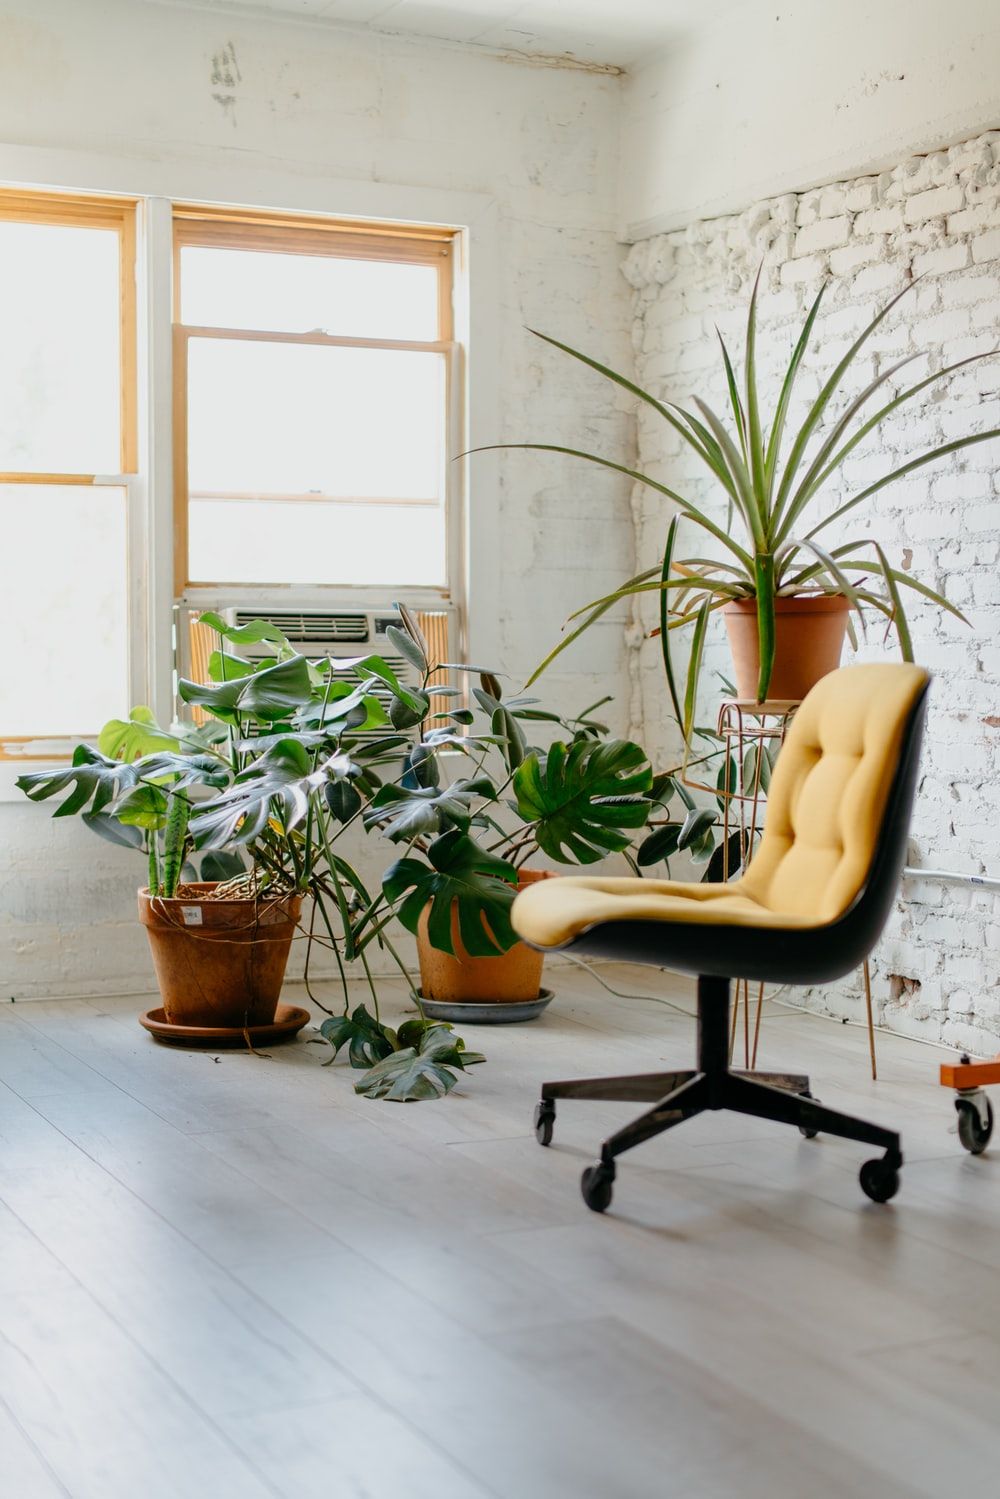 Office Chair Picture. Download Free Image